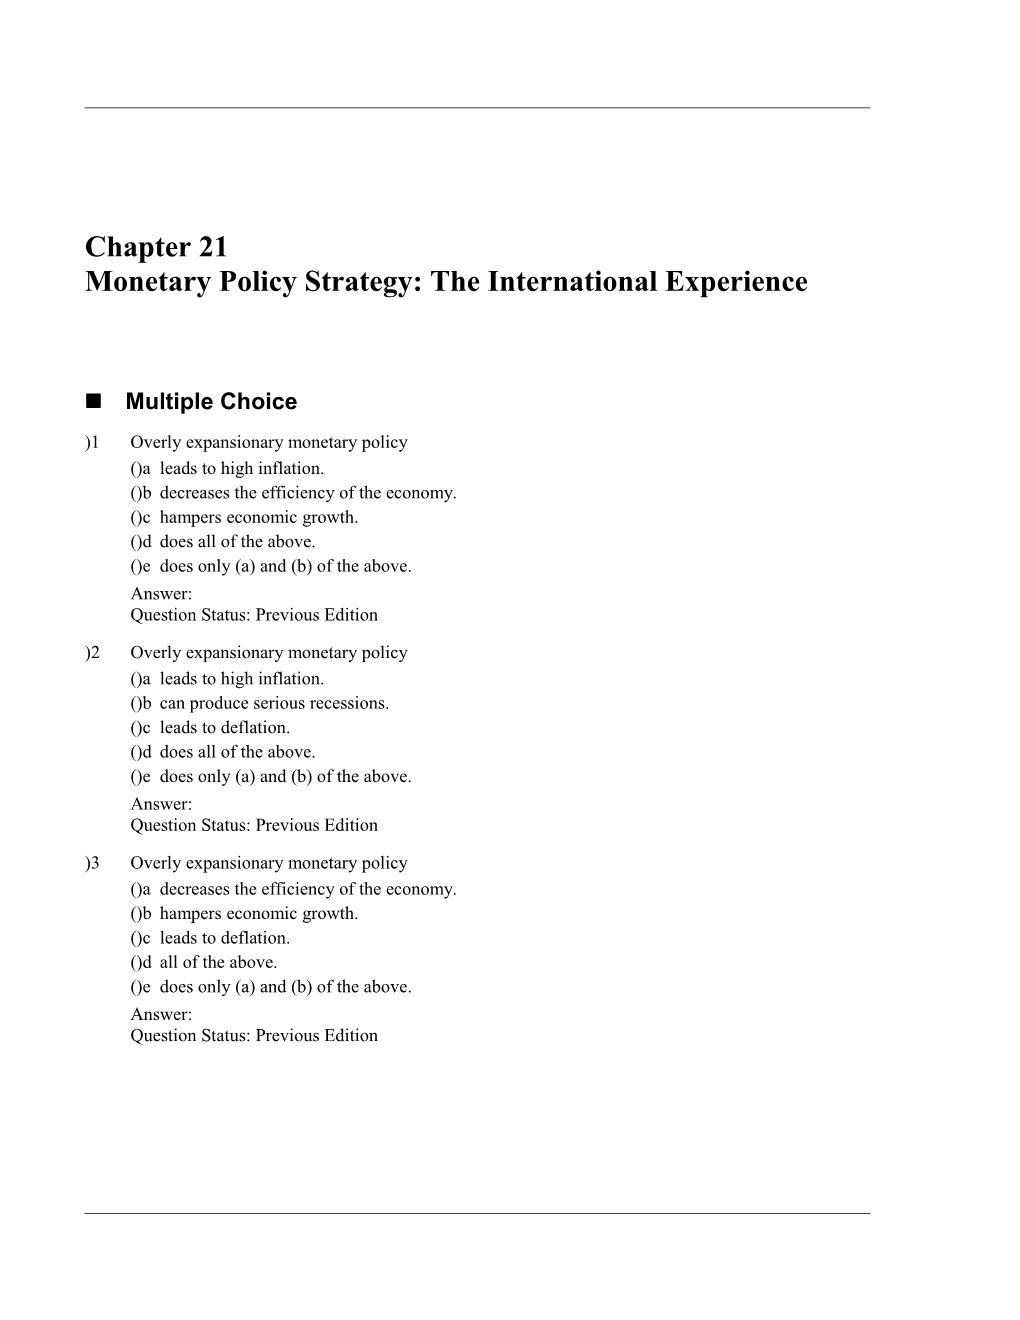 Chapter 21 Monetary Policy Strategy: the International Experience 1